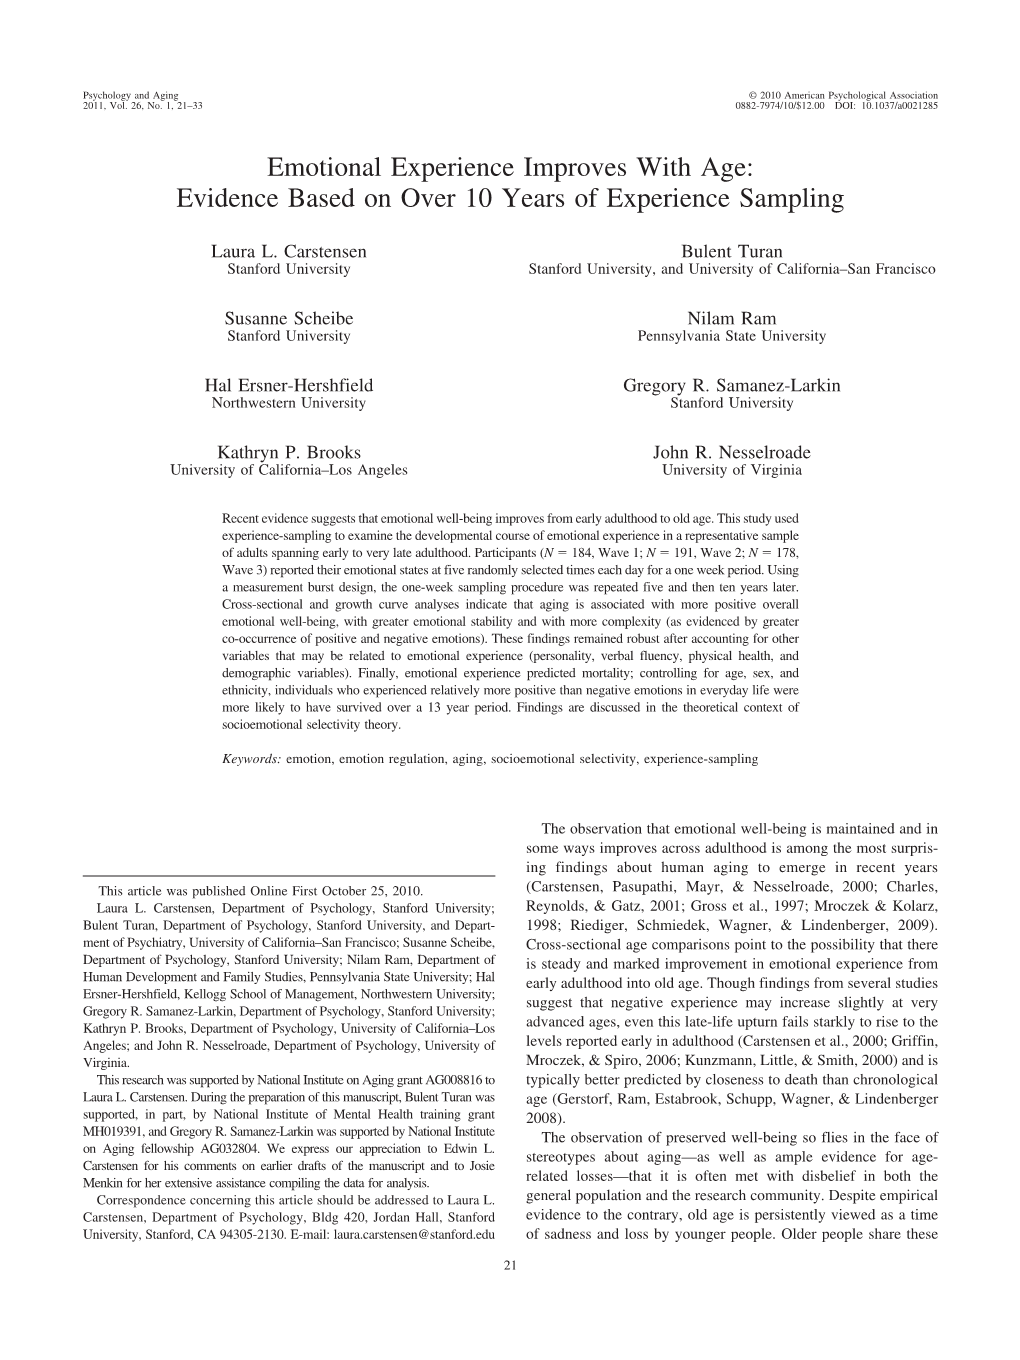 Emotional Experience Improves with Age: Evidence Based on Over 10 Years of Experience Sampling